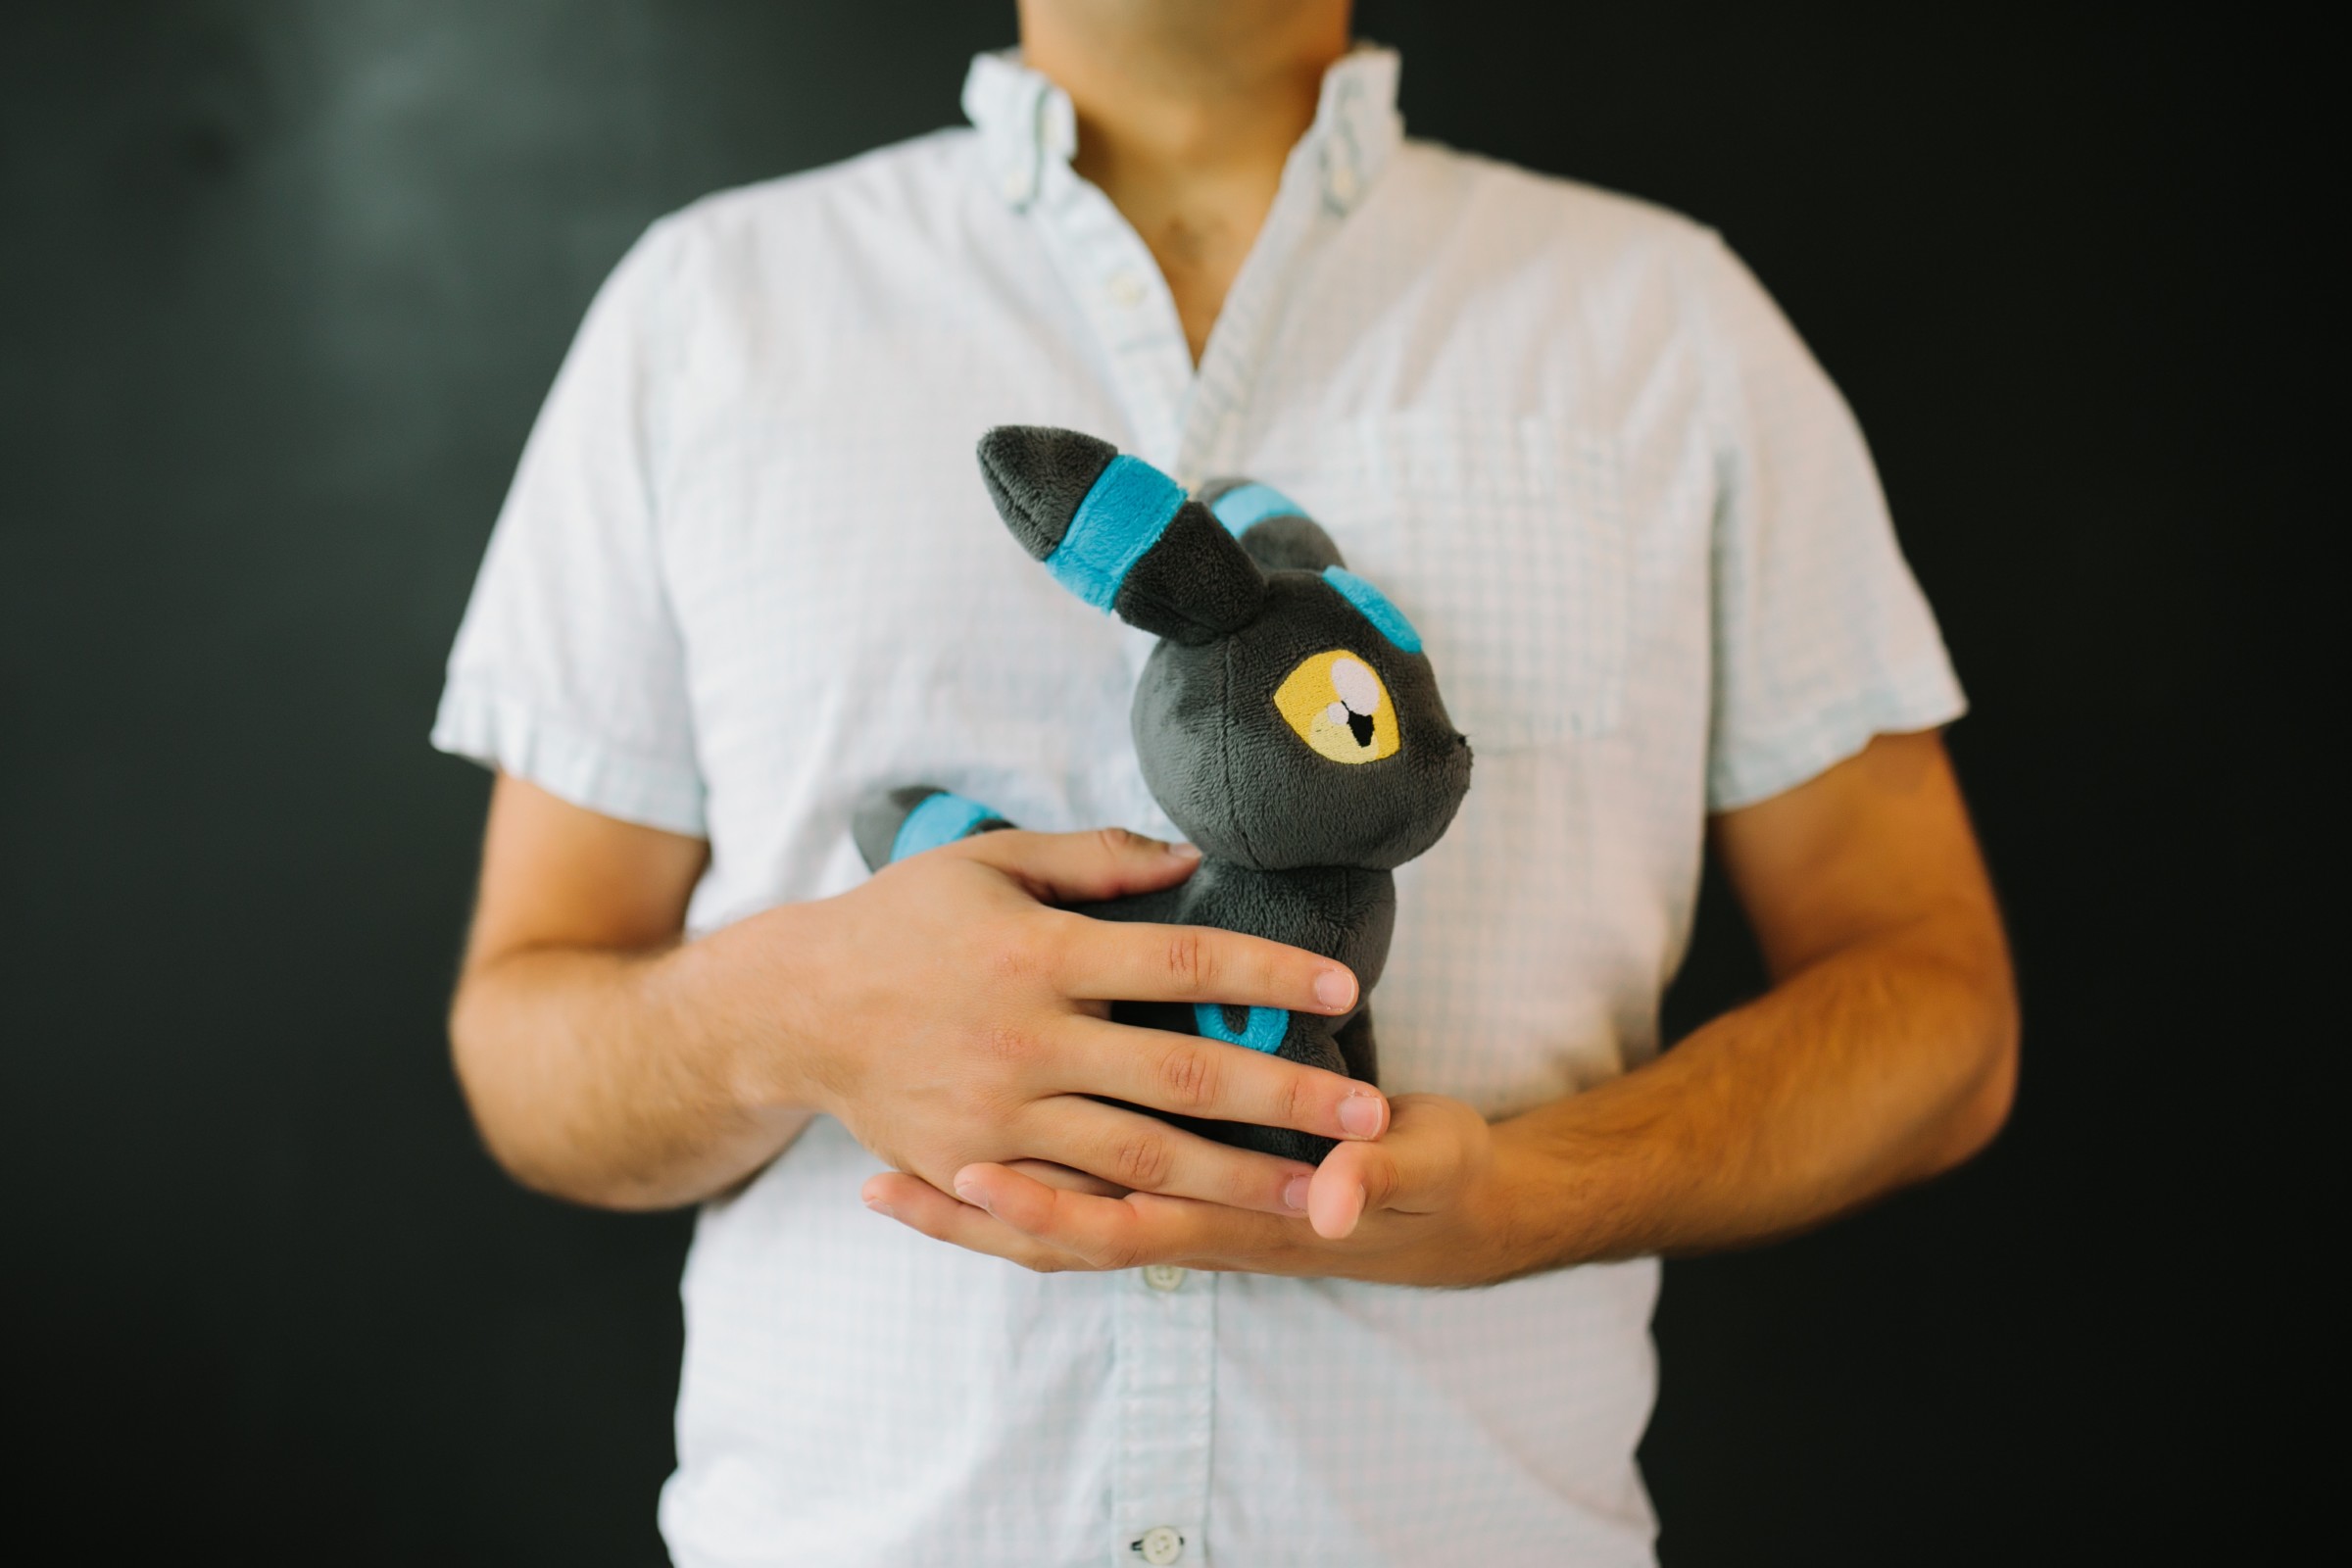 Author Anthony holding a stuffed plush toy of Umbreon from the Pokemon series